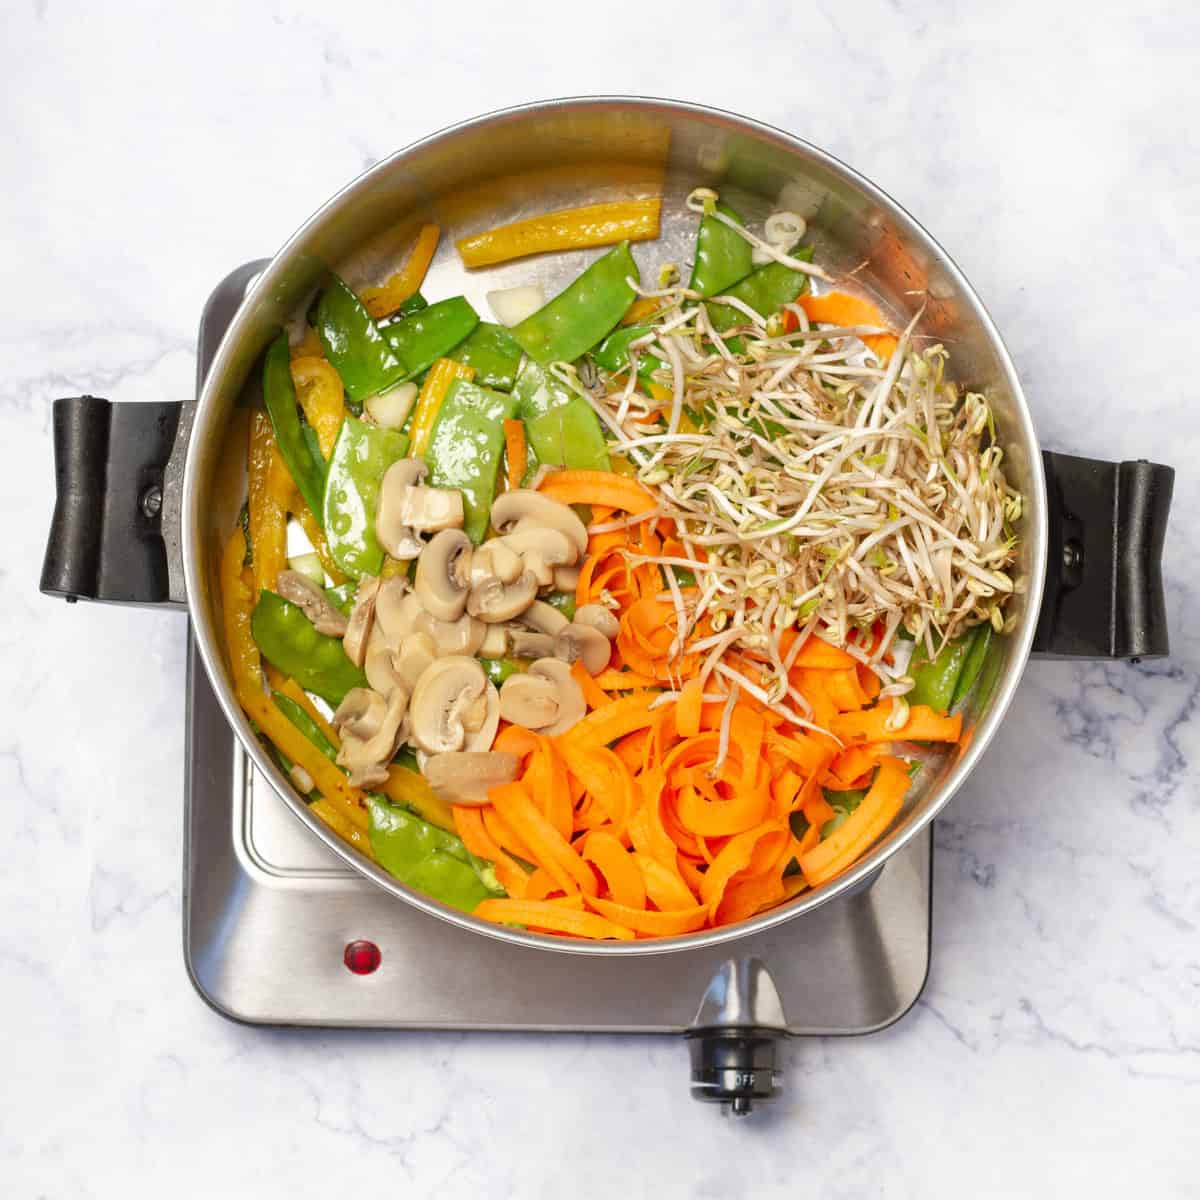 carrots, green onions and yellow bell pepper; stir-fry in a skillet